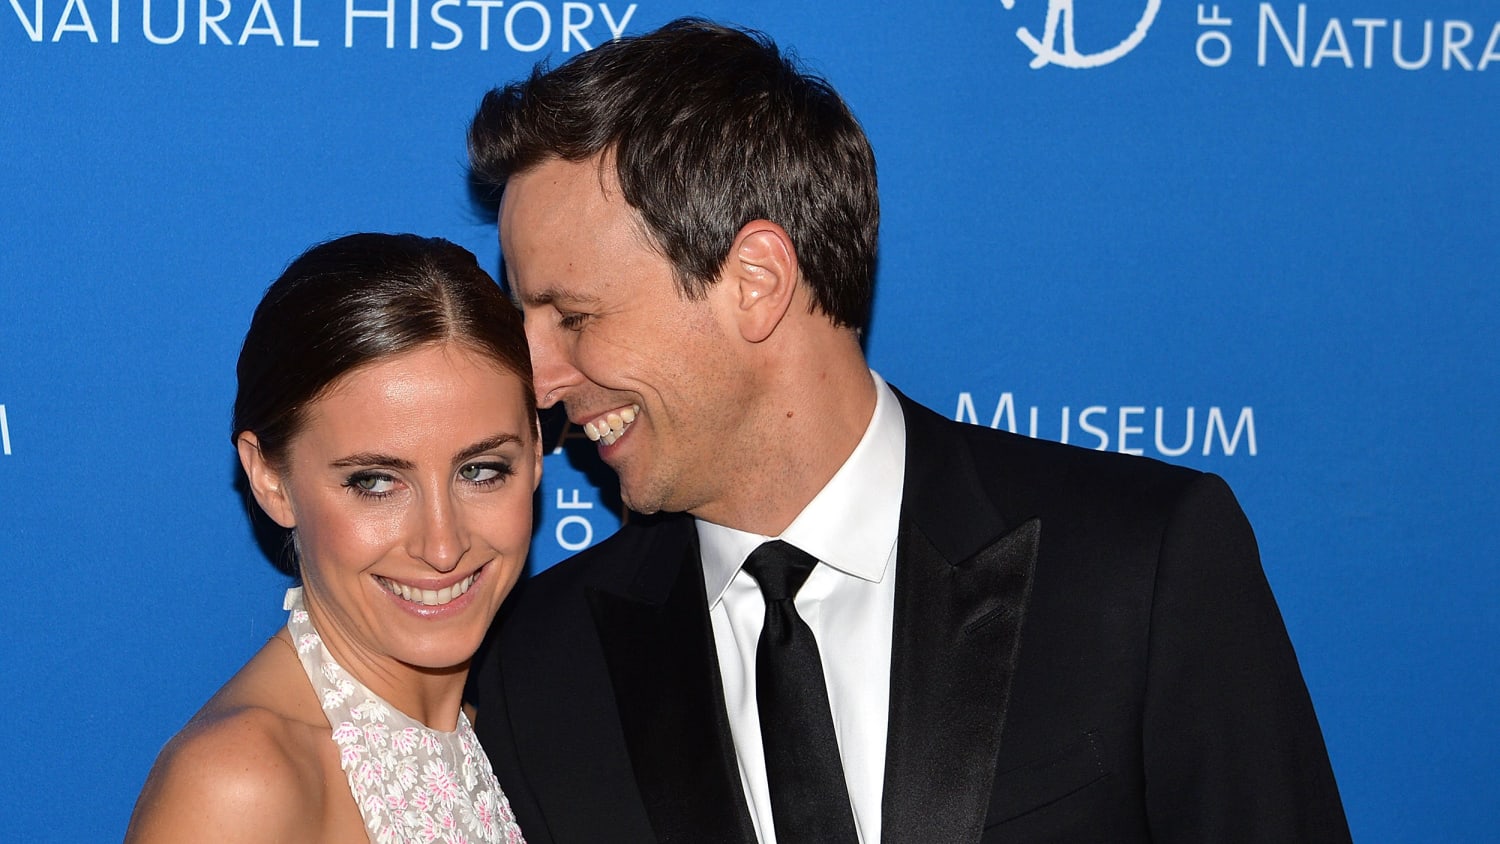 Seth Meyers and wife Alexi Meyers welcome first child, a baby boy - TODAY.com2500 x 1407